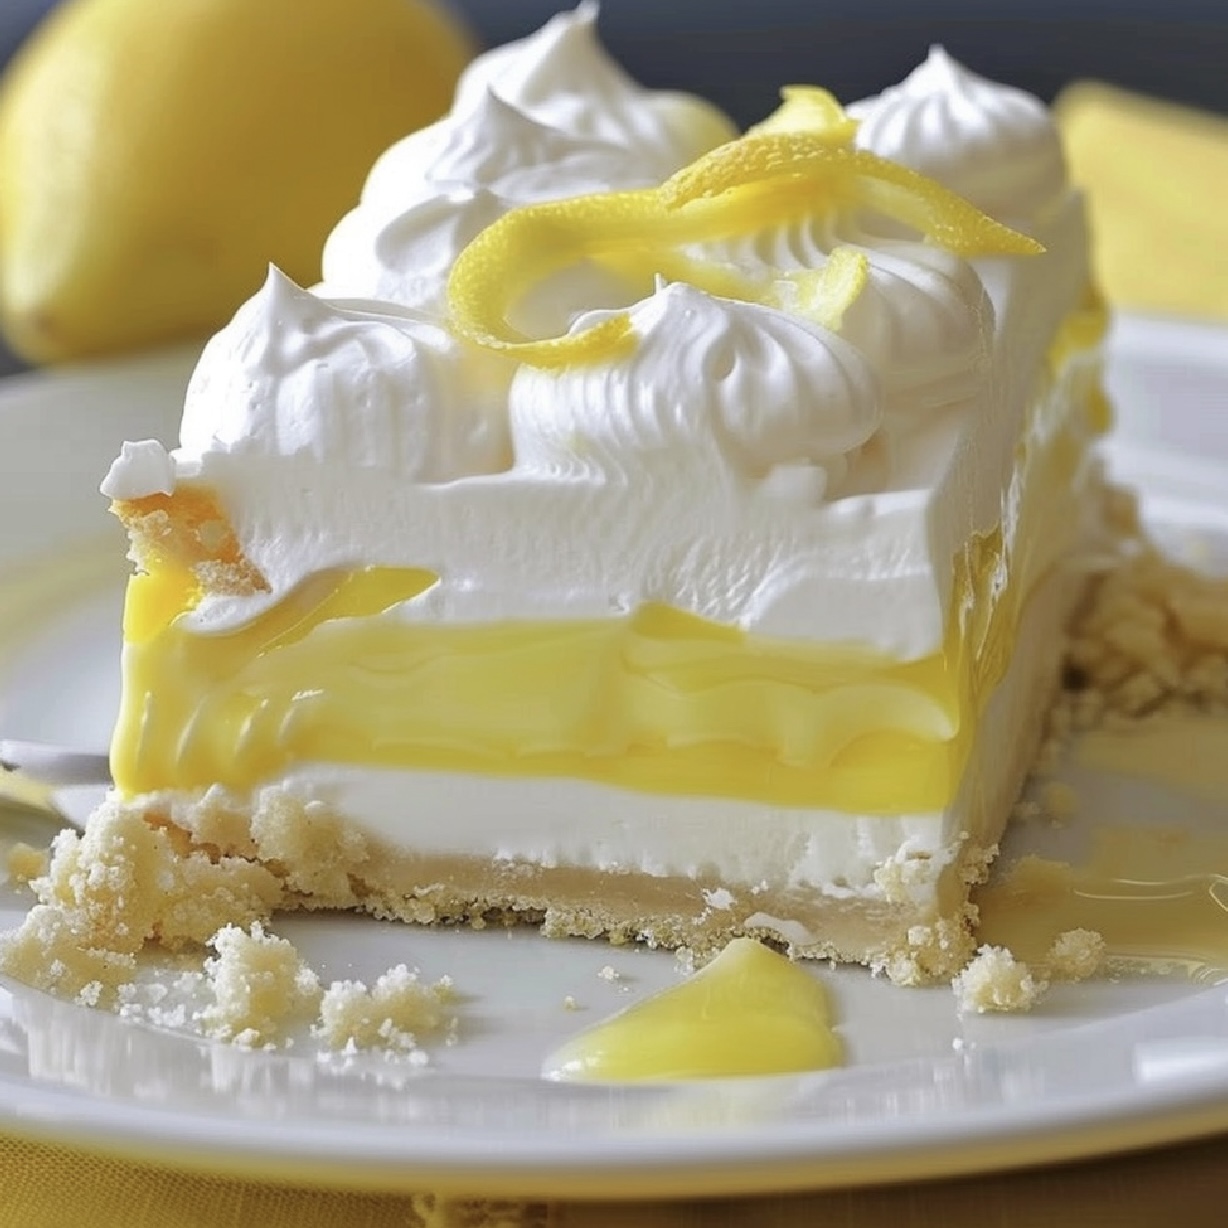 Lemon Lush Delight: A Tangy Temptation in Every Bite